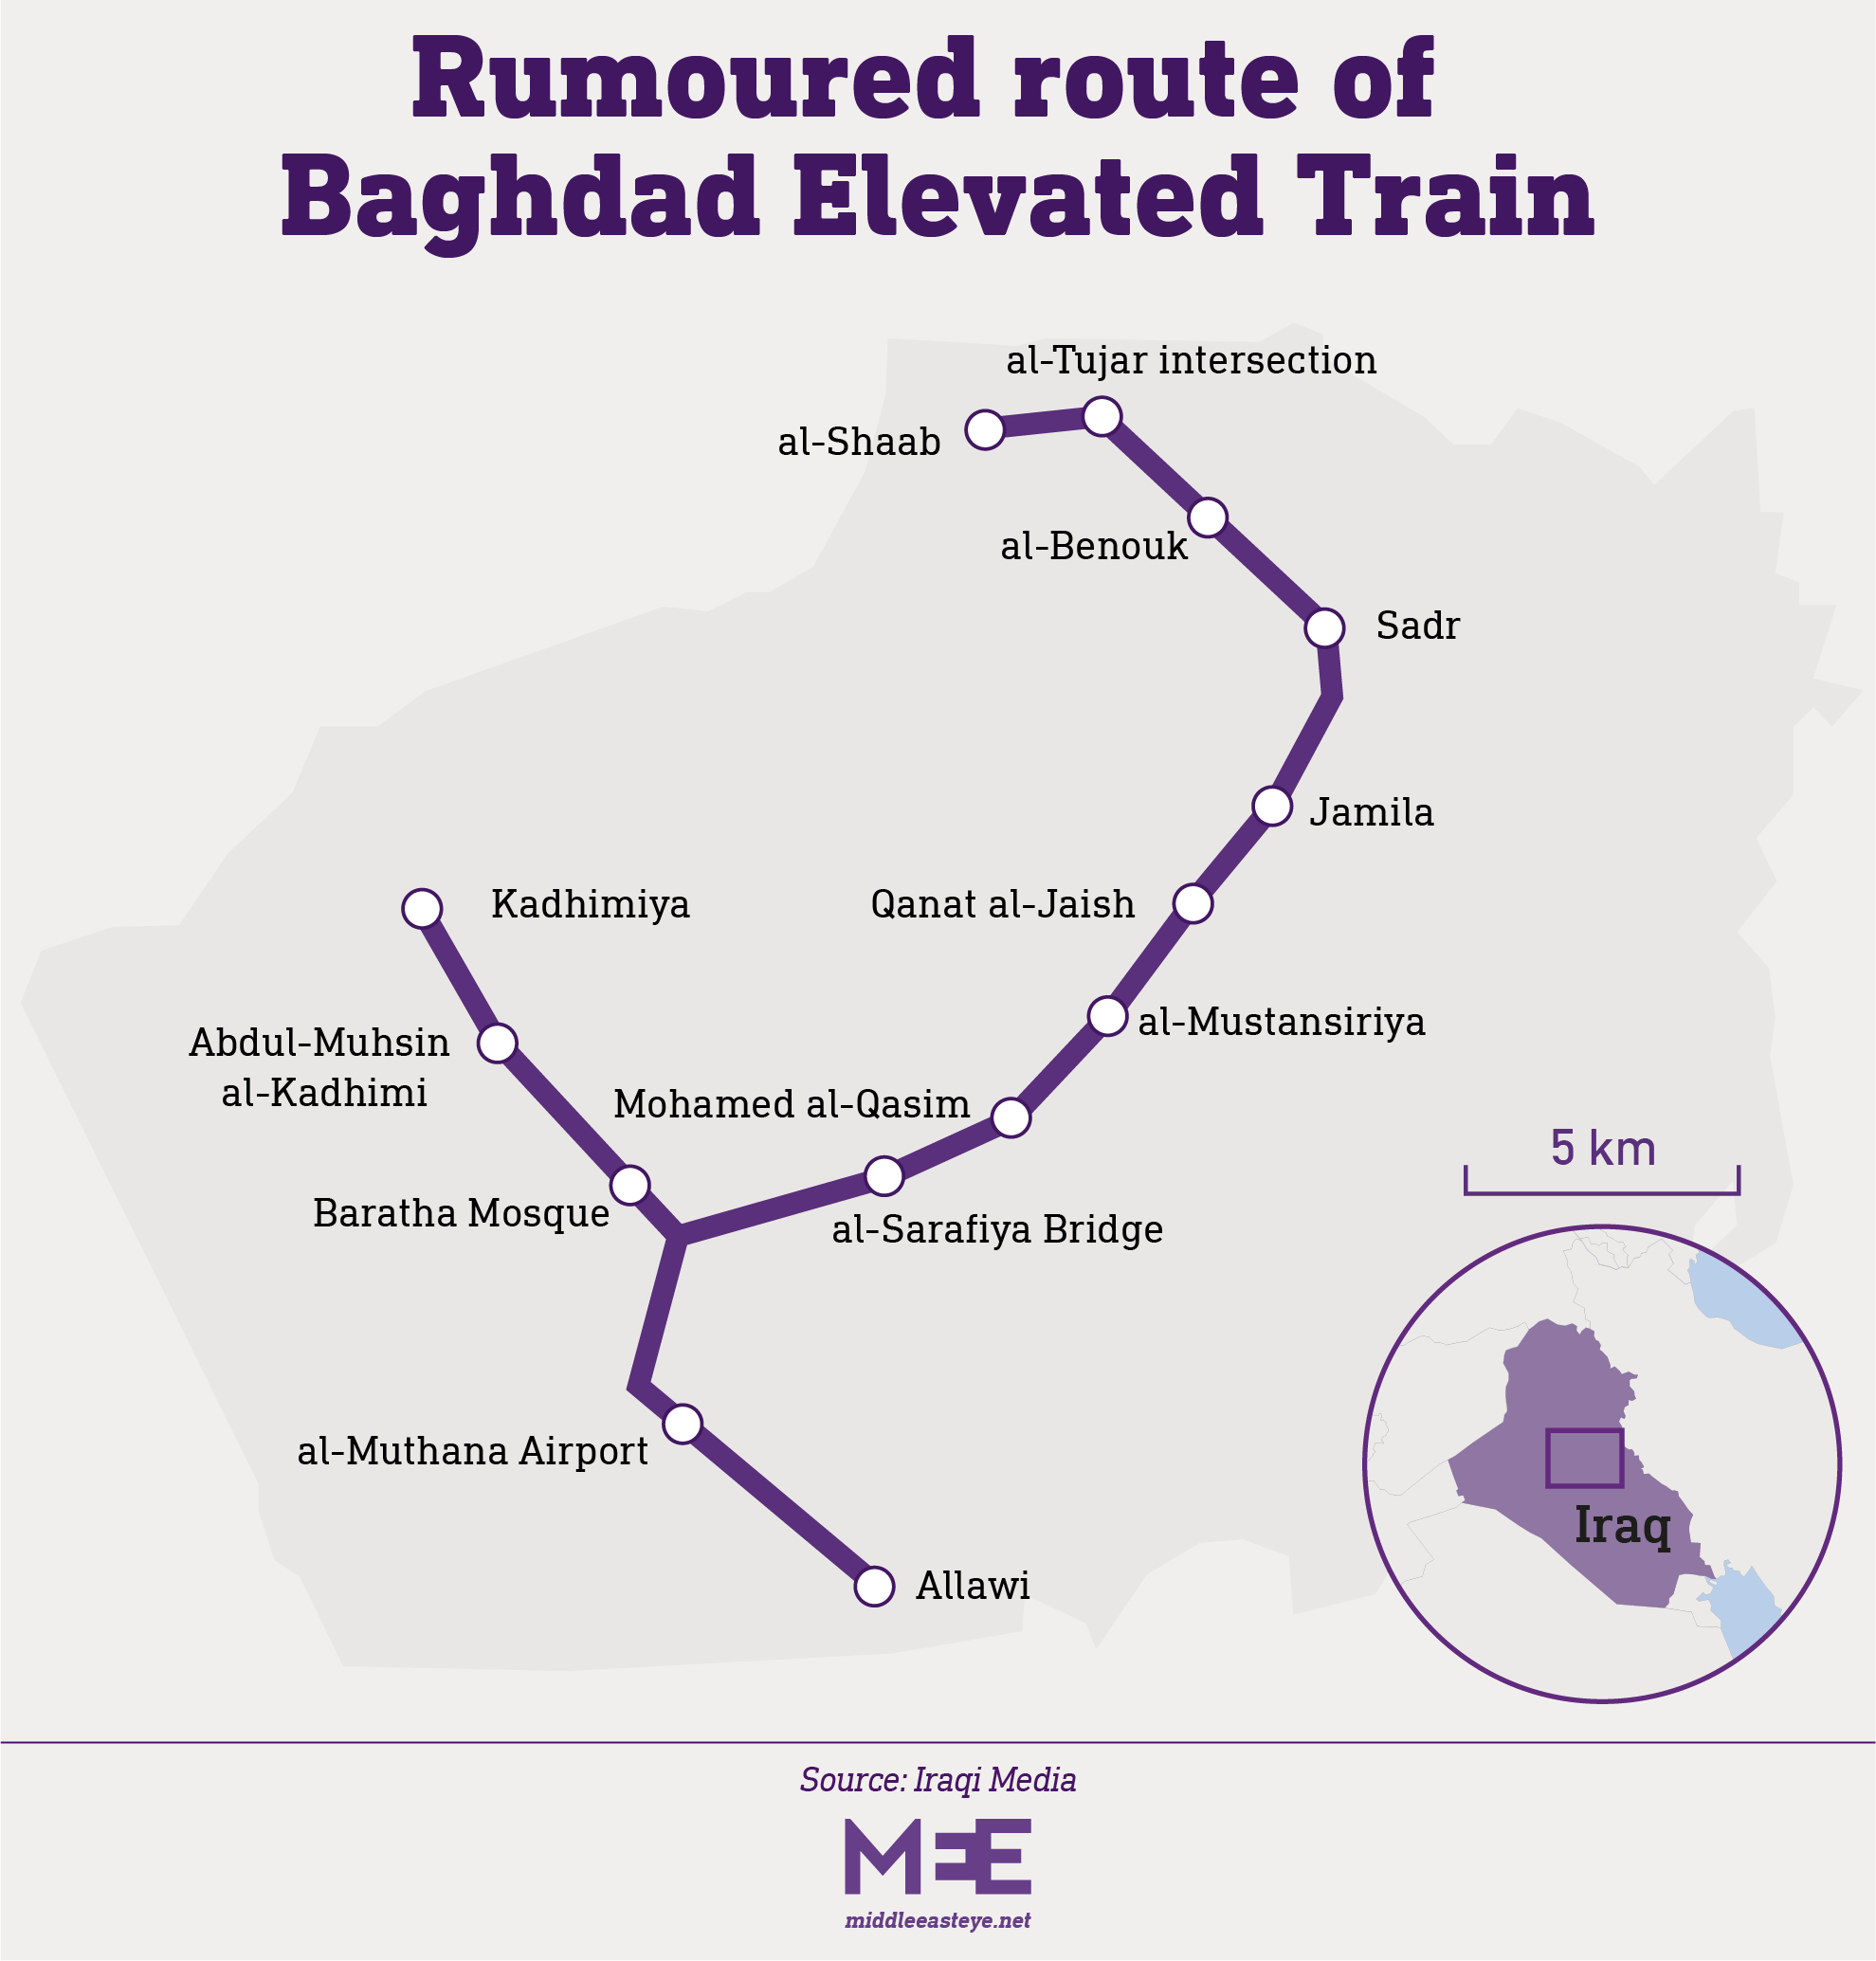 Rumoured route of Baghdad elevated train